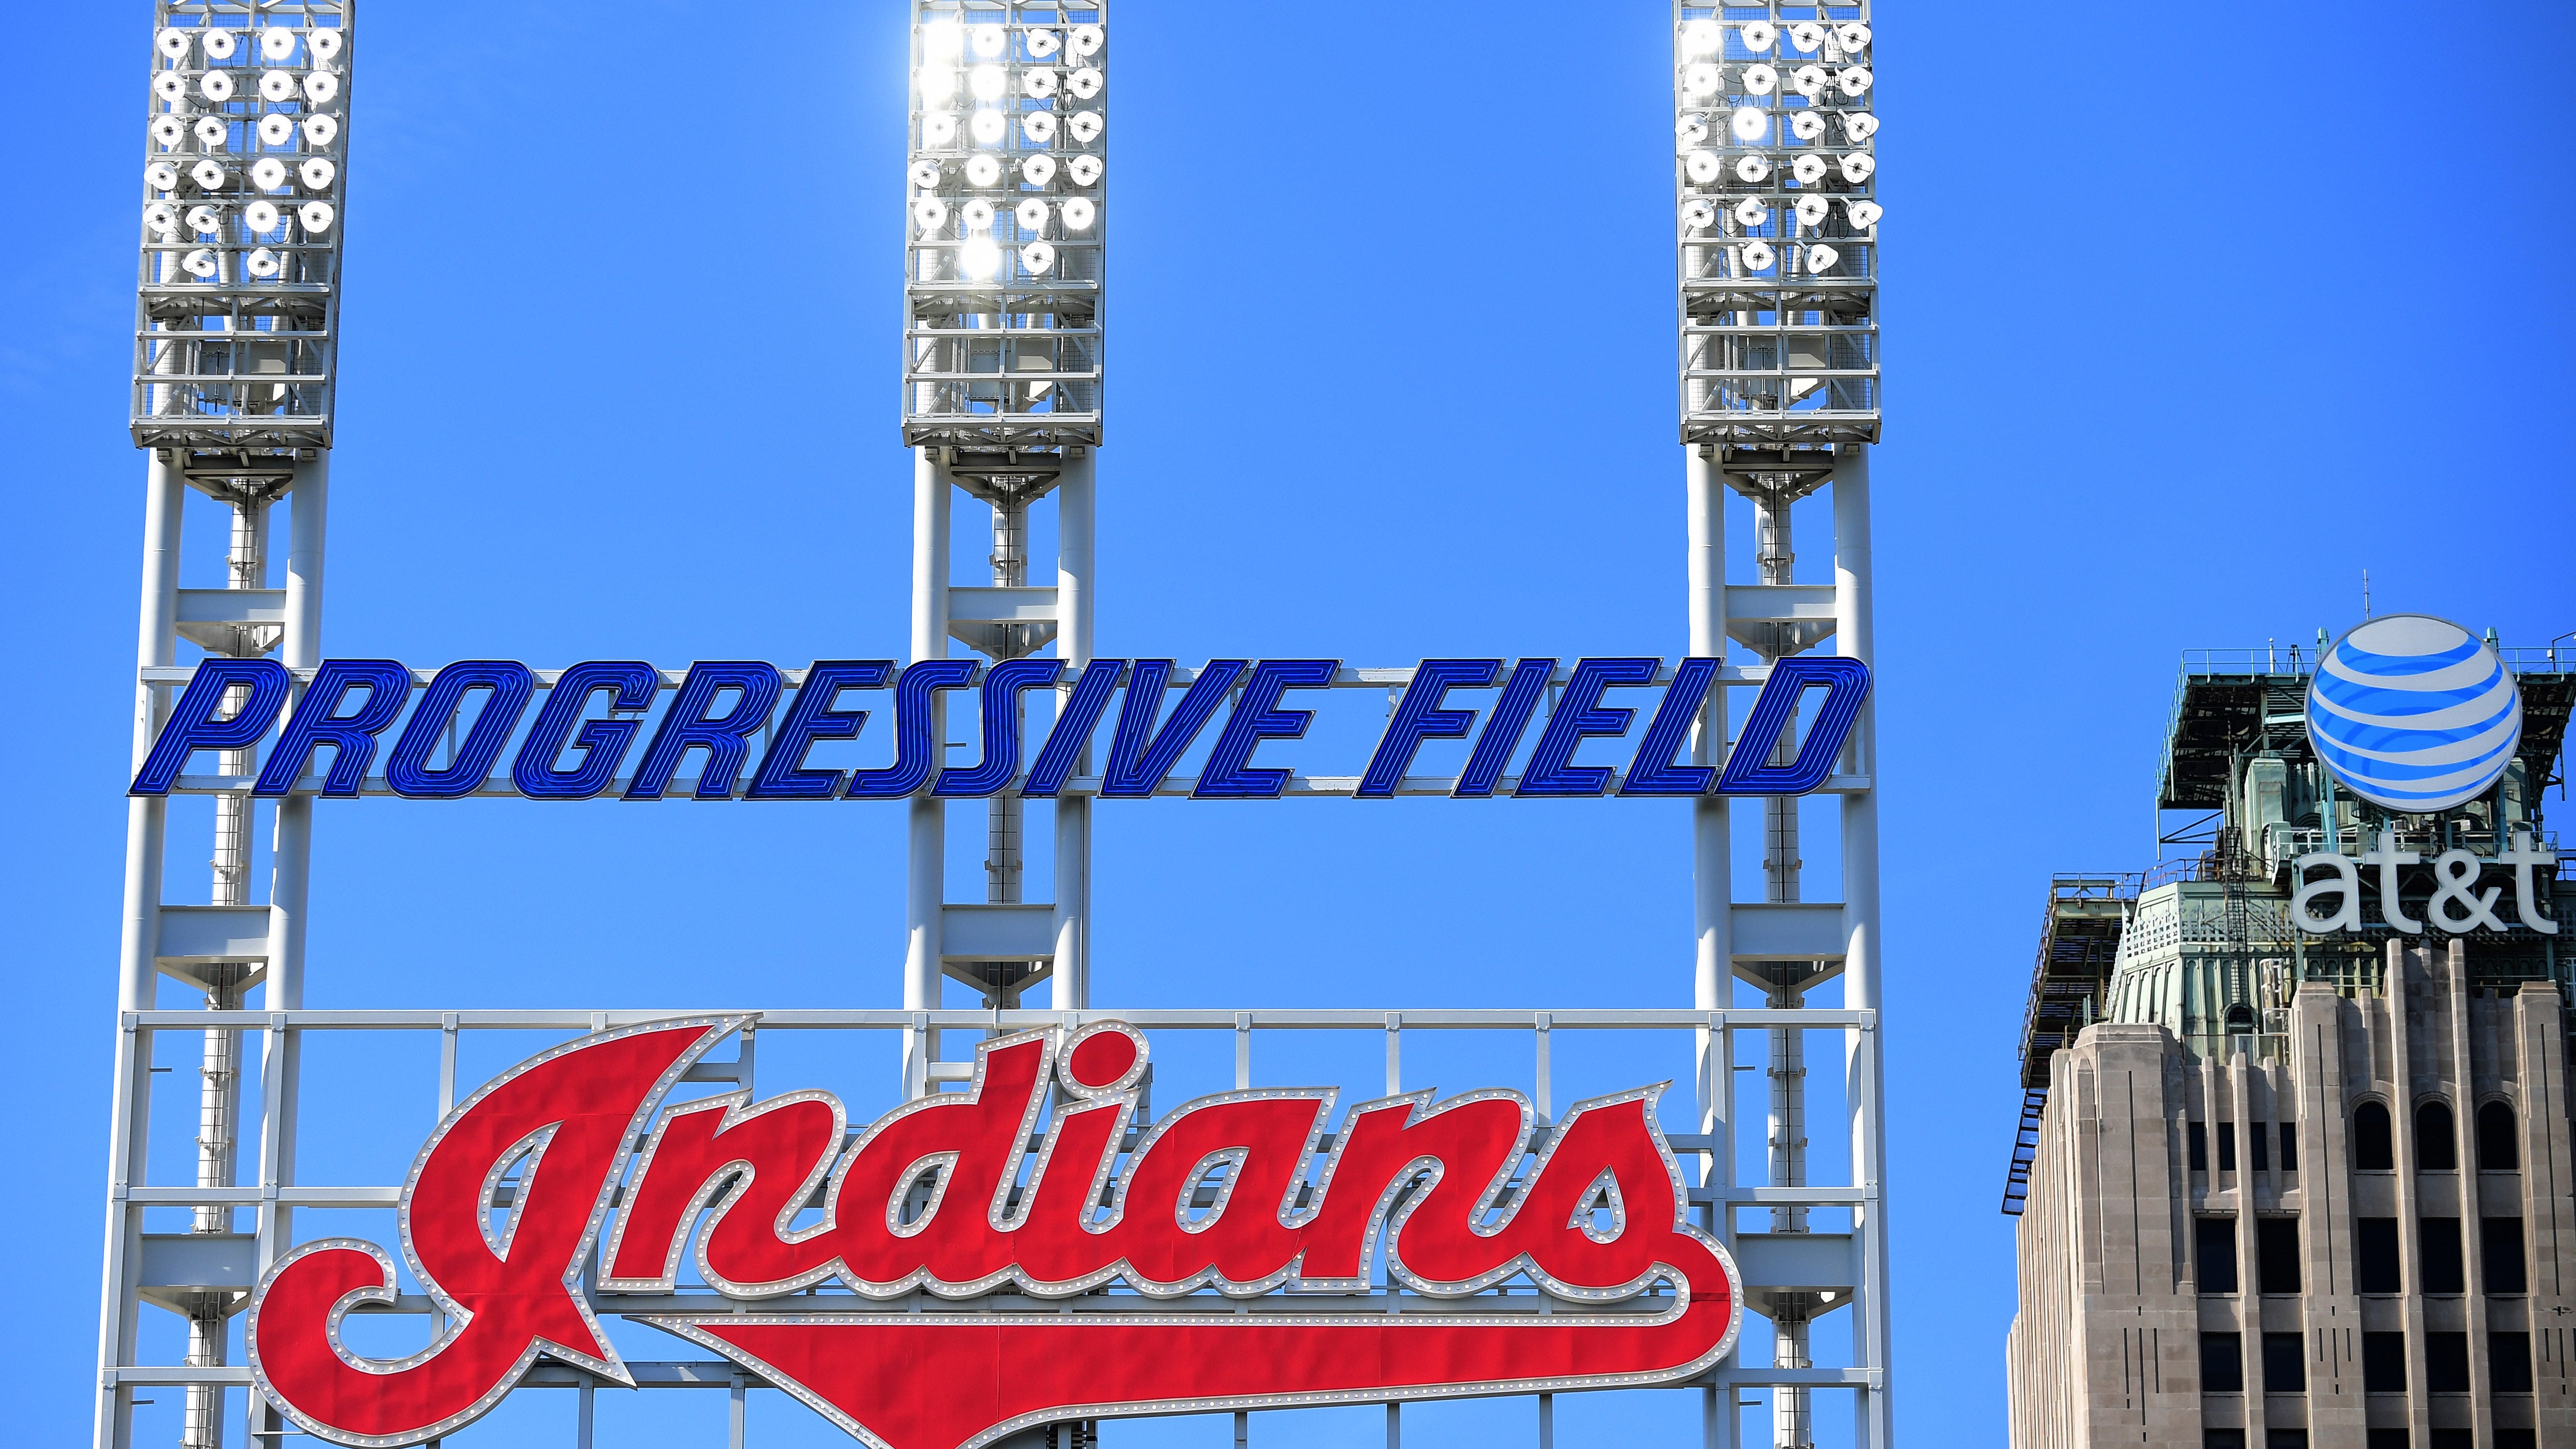 MLB: Cleveland Indians to change name to Guardians for 2022 season, Baseball News